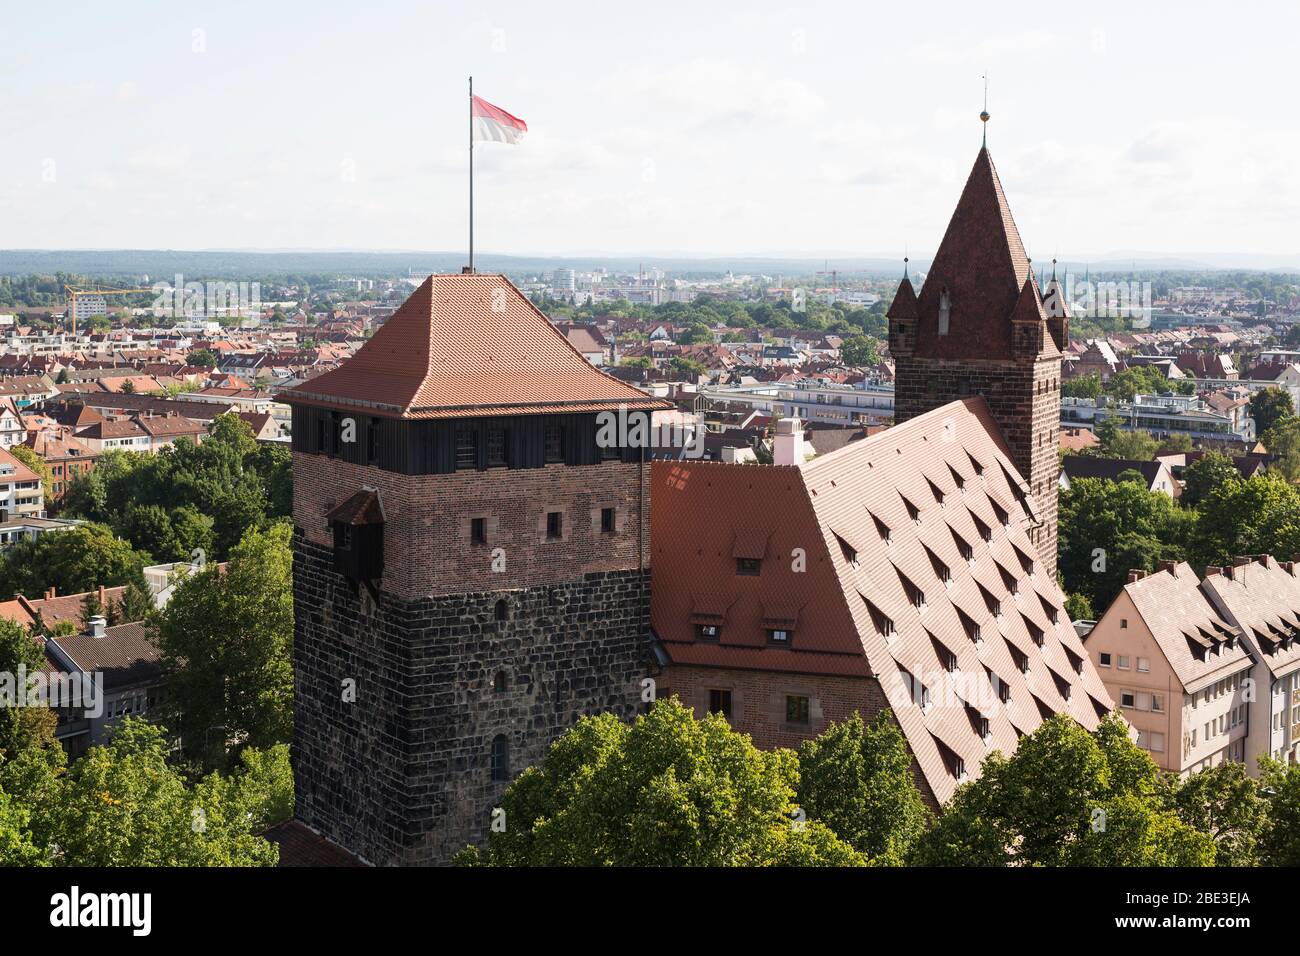 Views of the city from the Imperial Castle in Nuremberg, Germany. Stock Photo